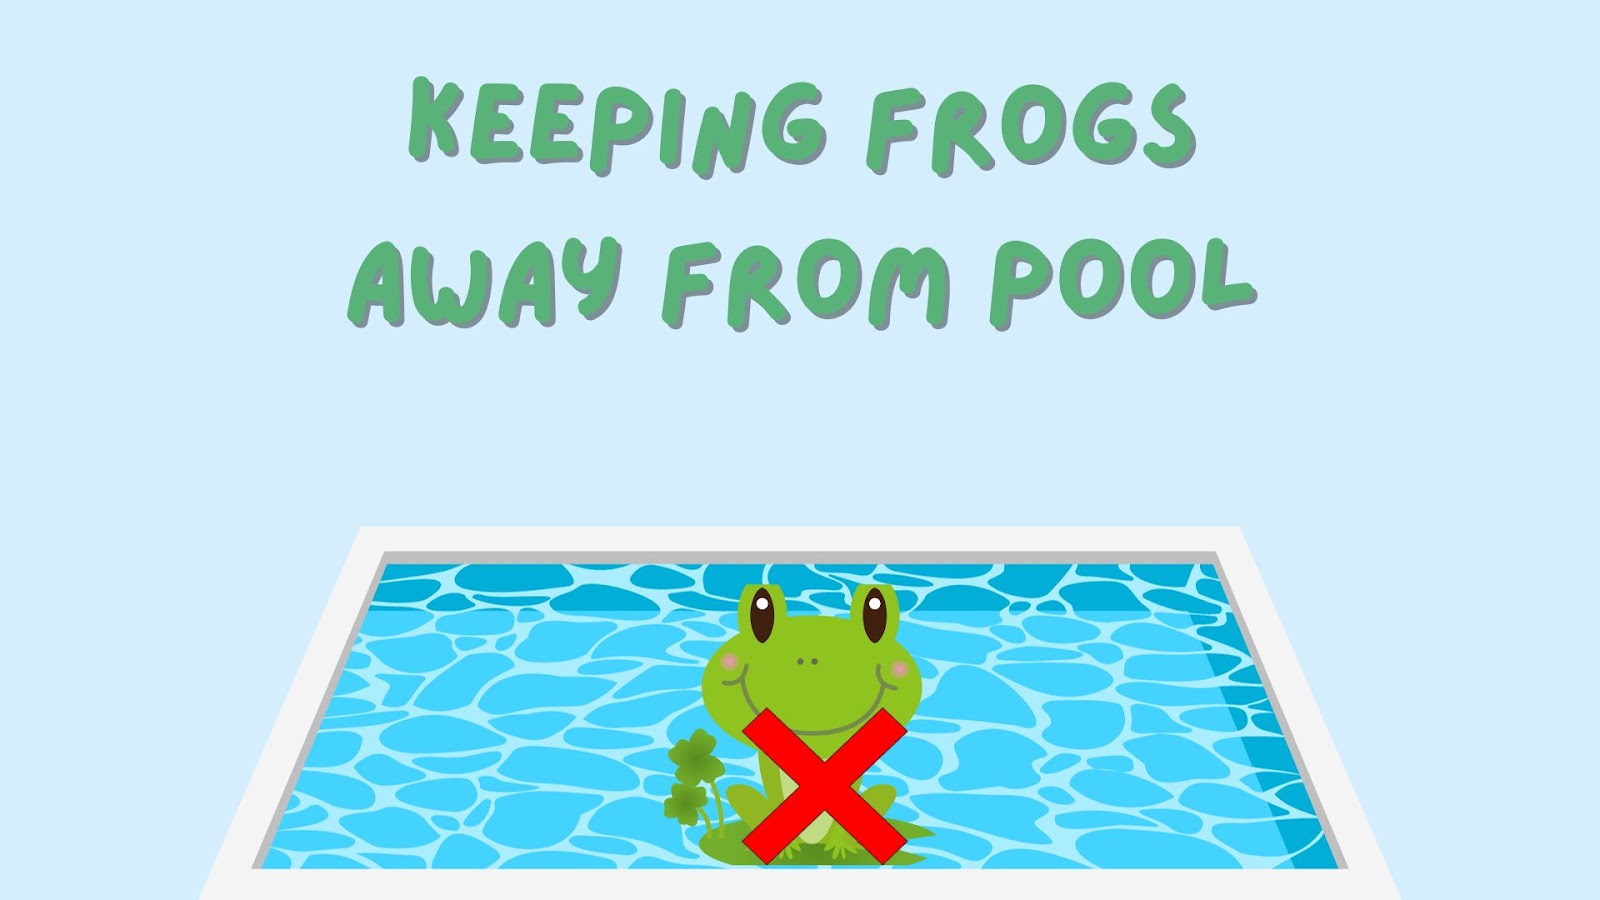 How to Keep Frogs Away From Pool